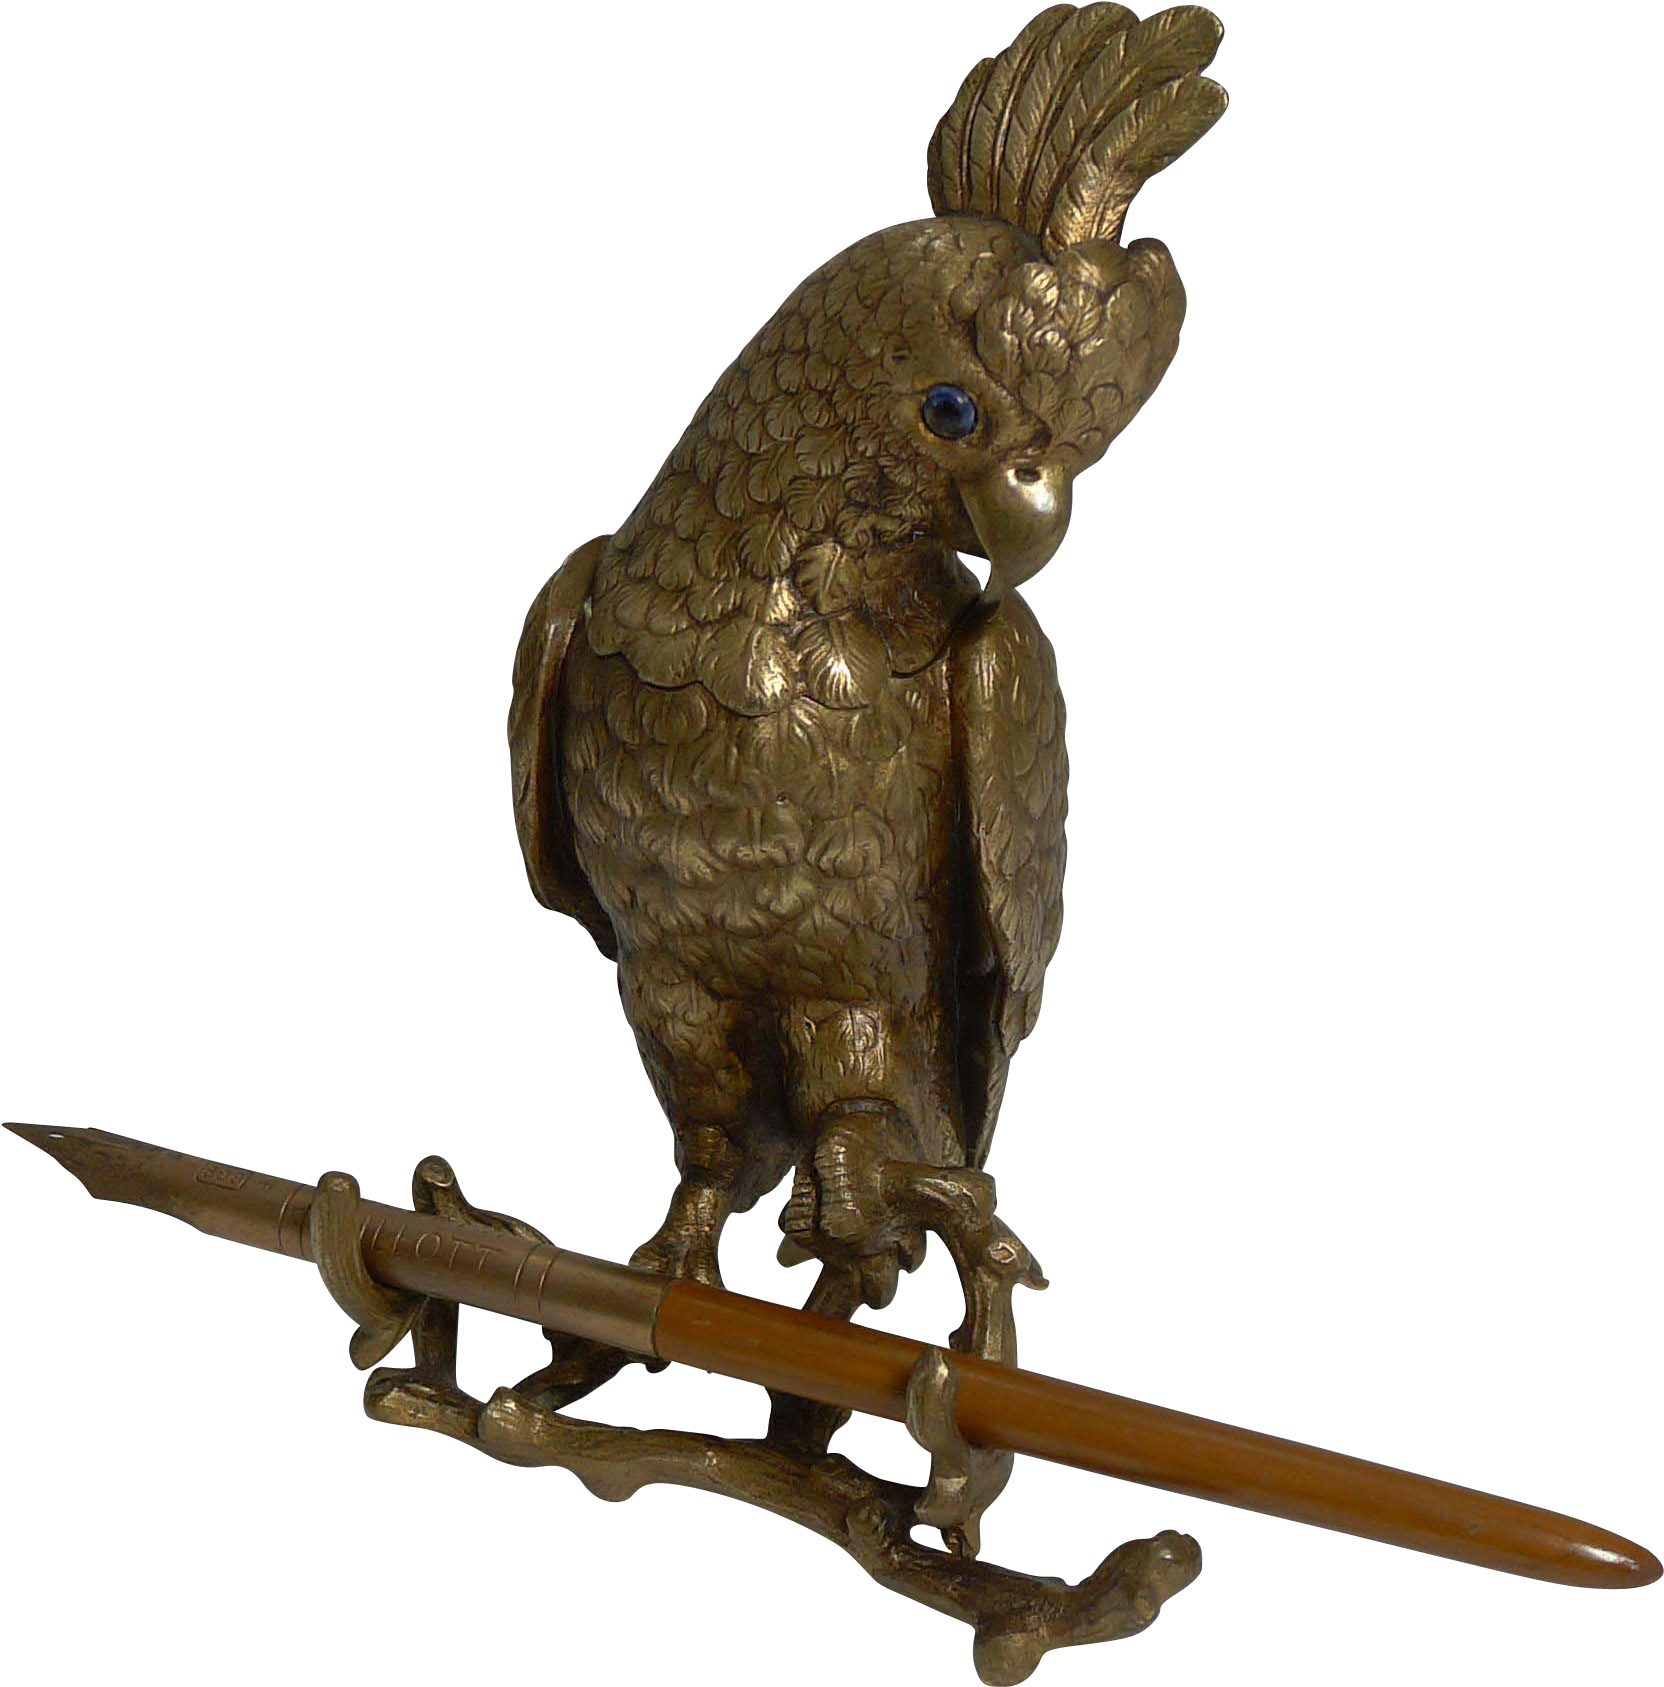 A Gold Bird Statue With A Sword